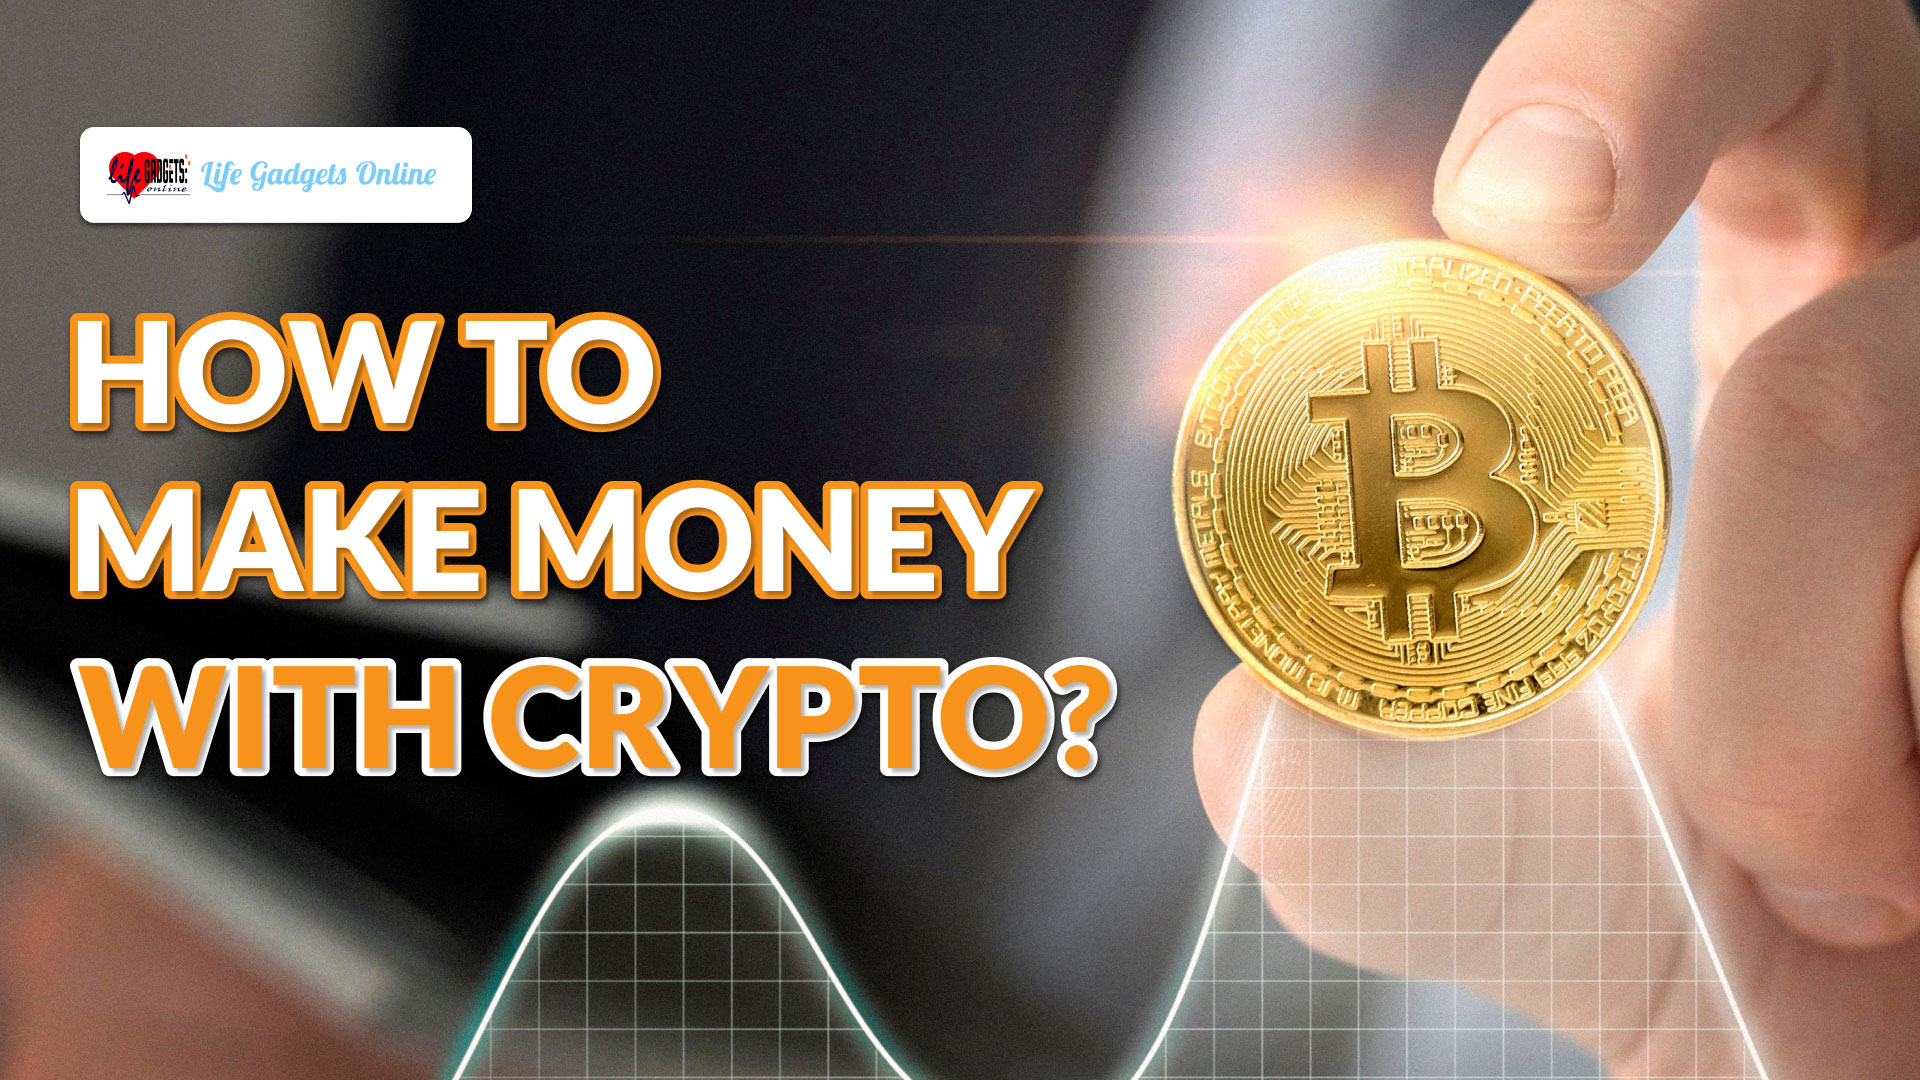 How To Make Money With Cryptocurrency?